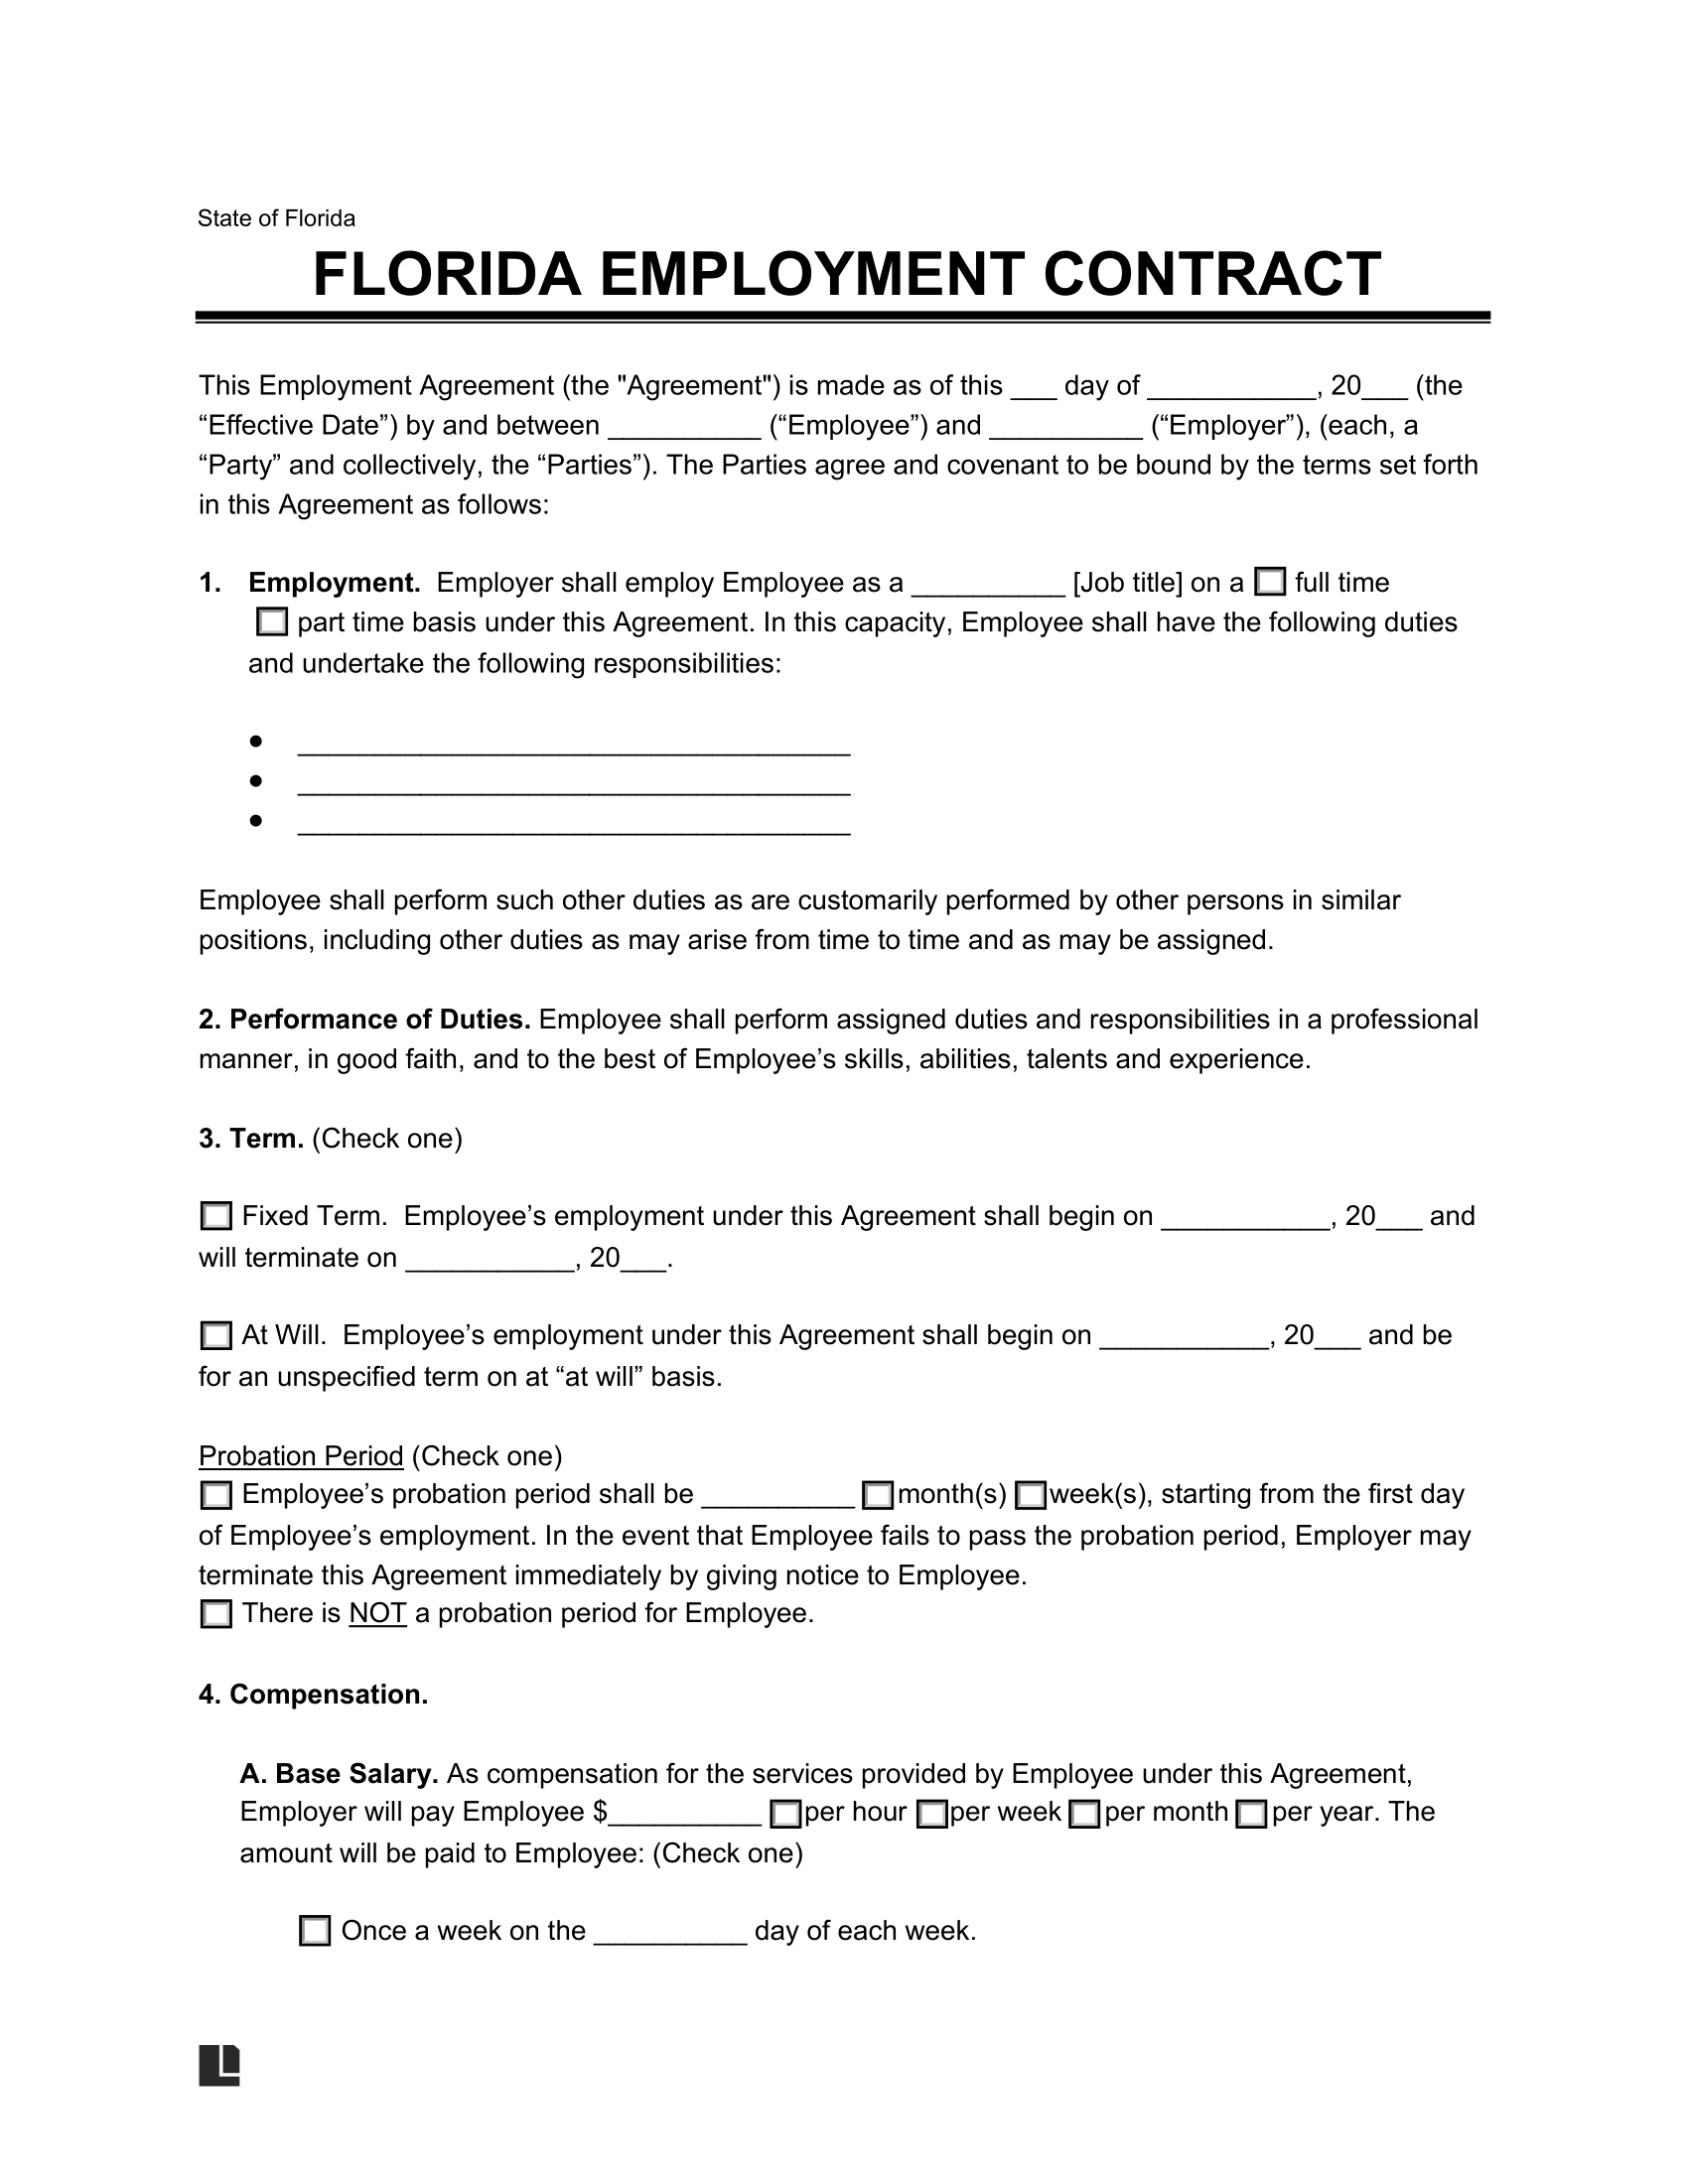 florida employment contract template